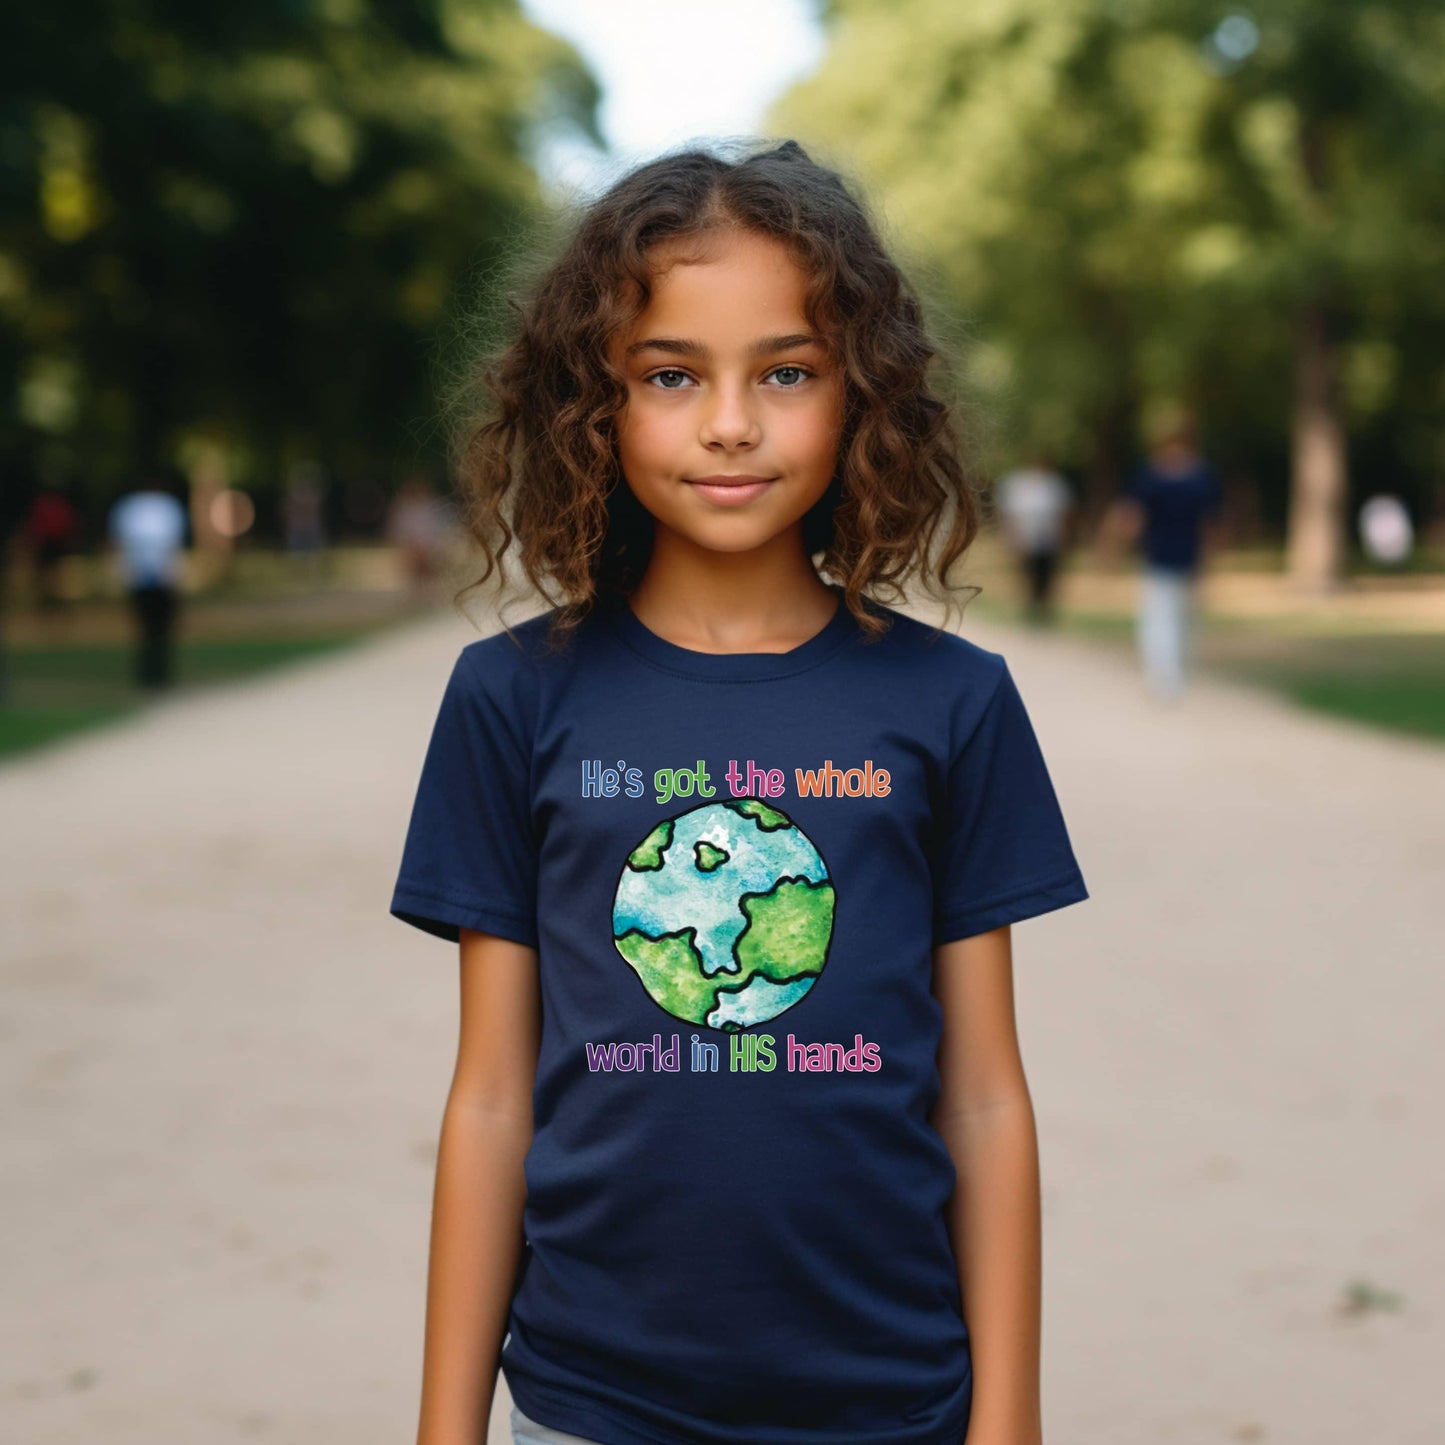 He's Got The Whole World In His Hands Youth T-Shirt - JT Footprint Apparel